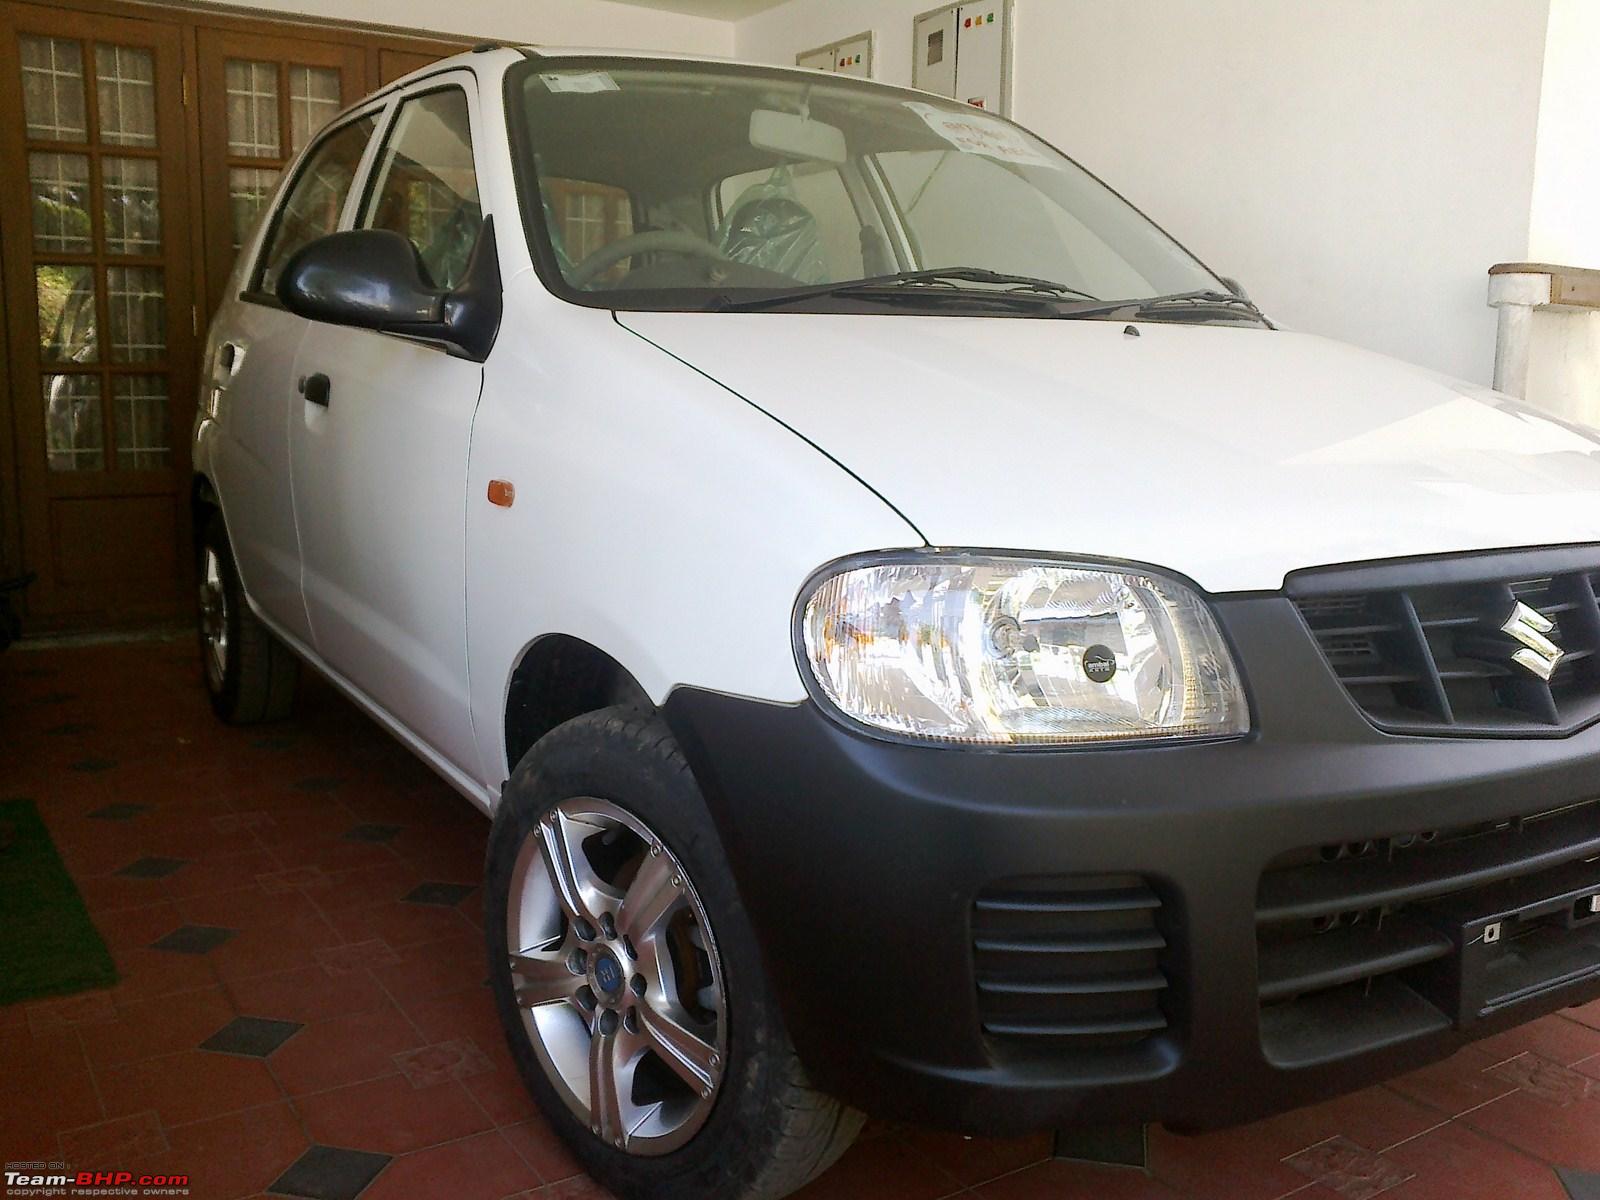 Alto800 Lxi BS IV car for sale Excellent condition Run only 2000 Km